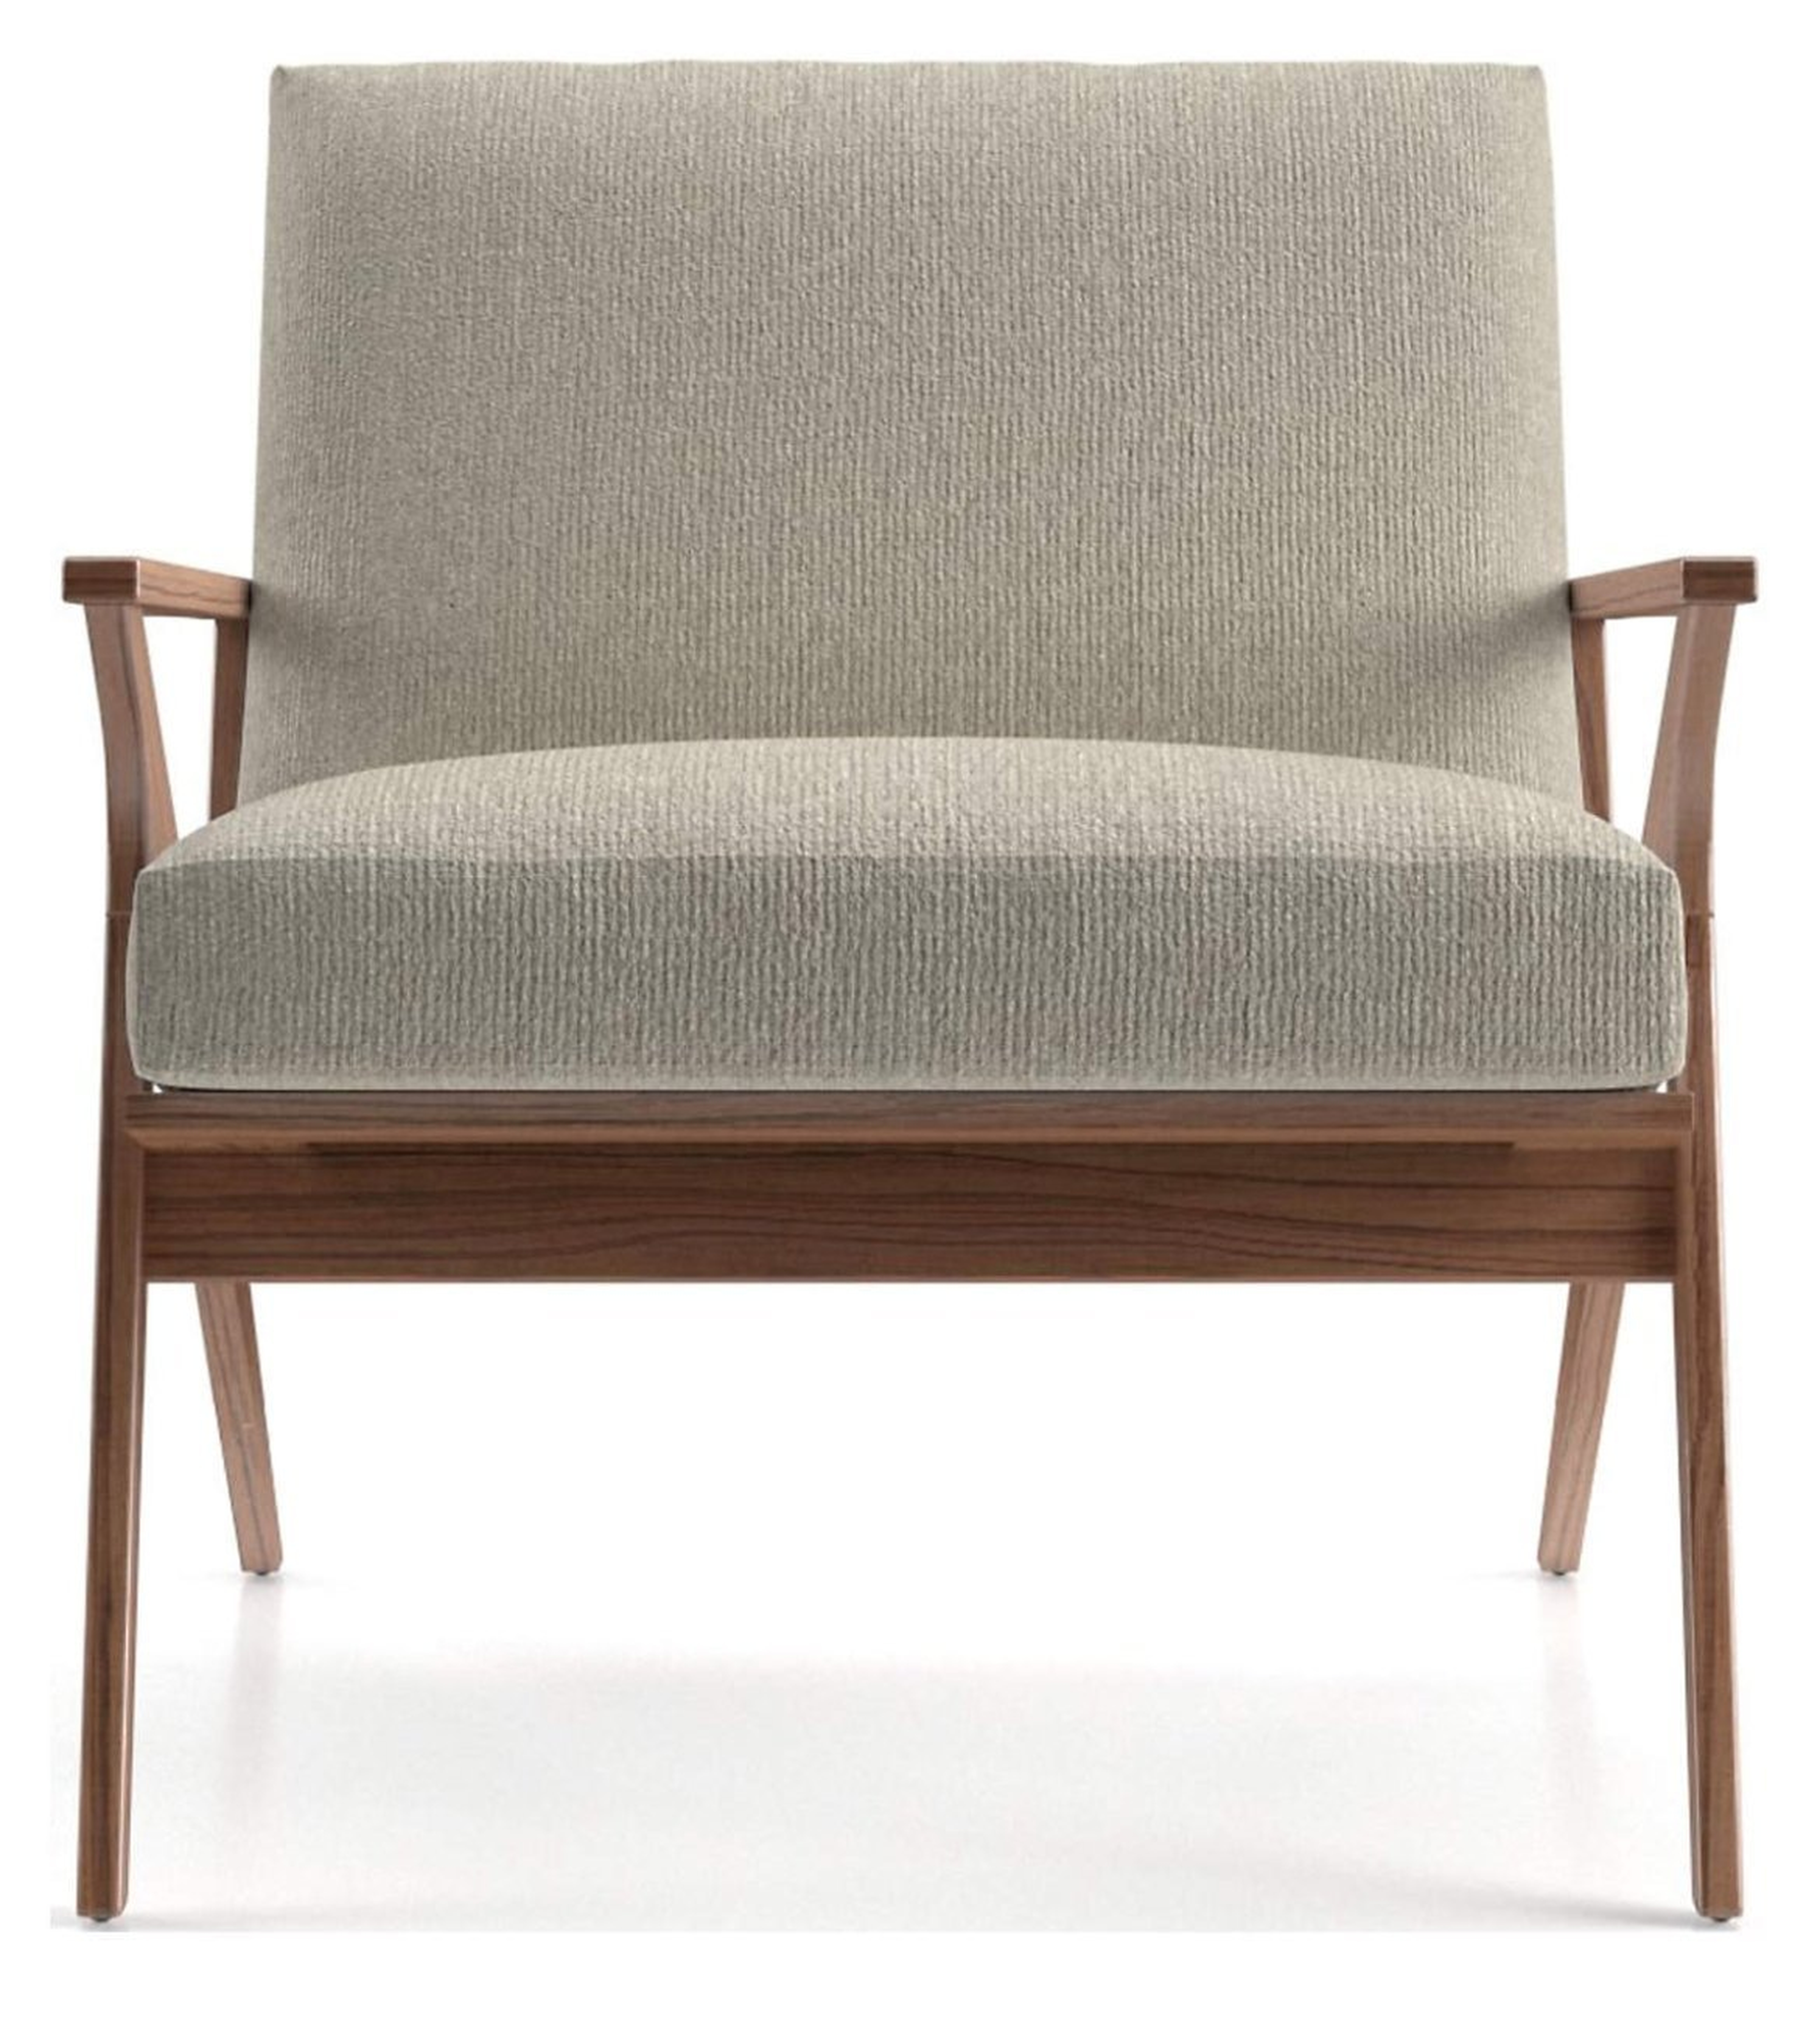 Cavett Wood Frame Accent Chair - Crate and Barrel